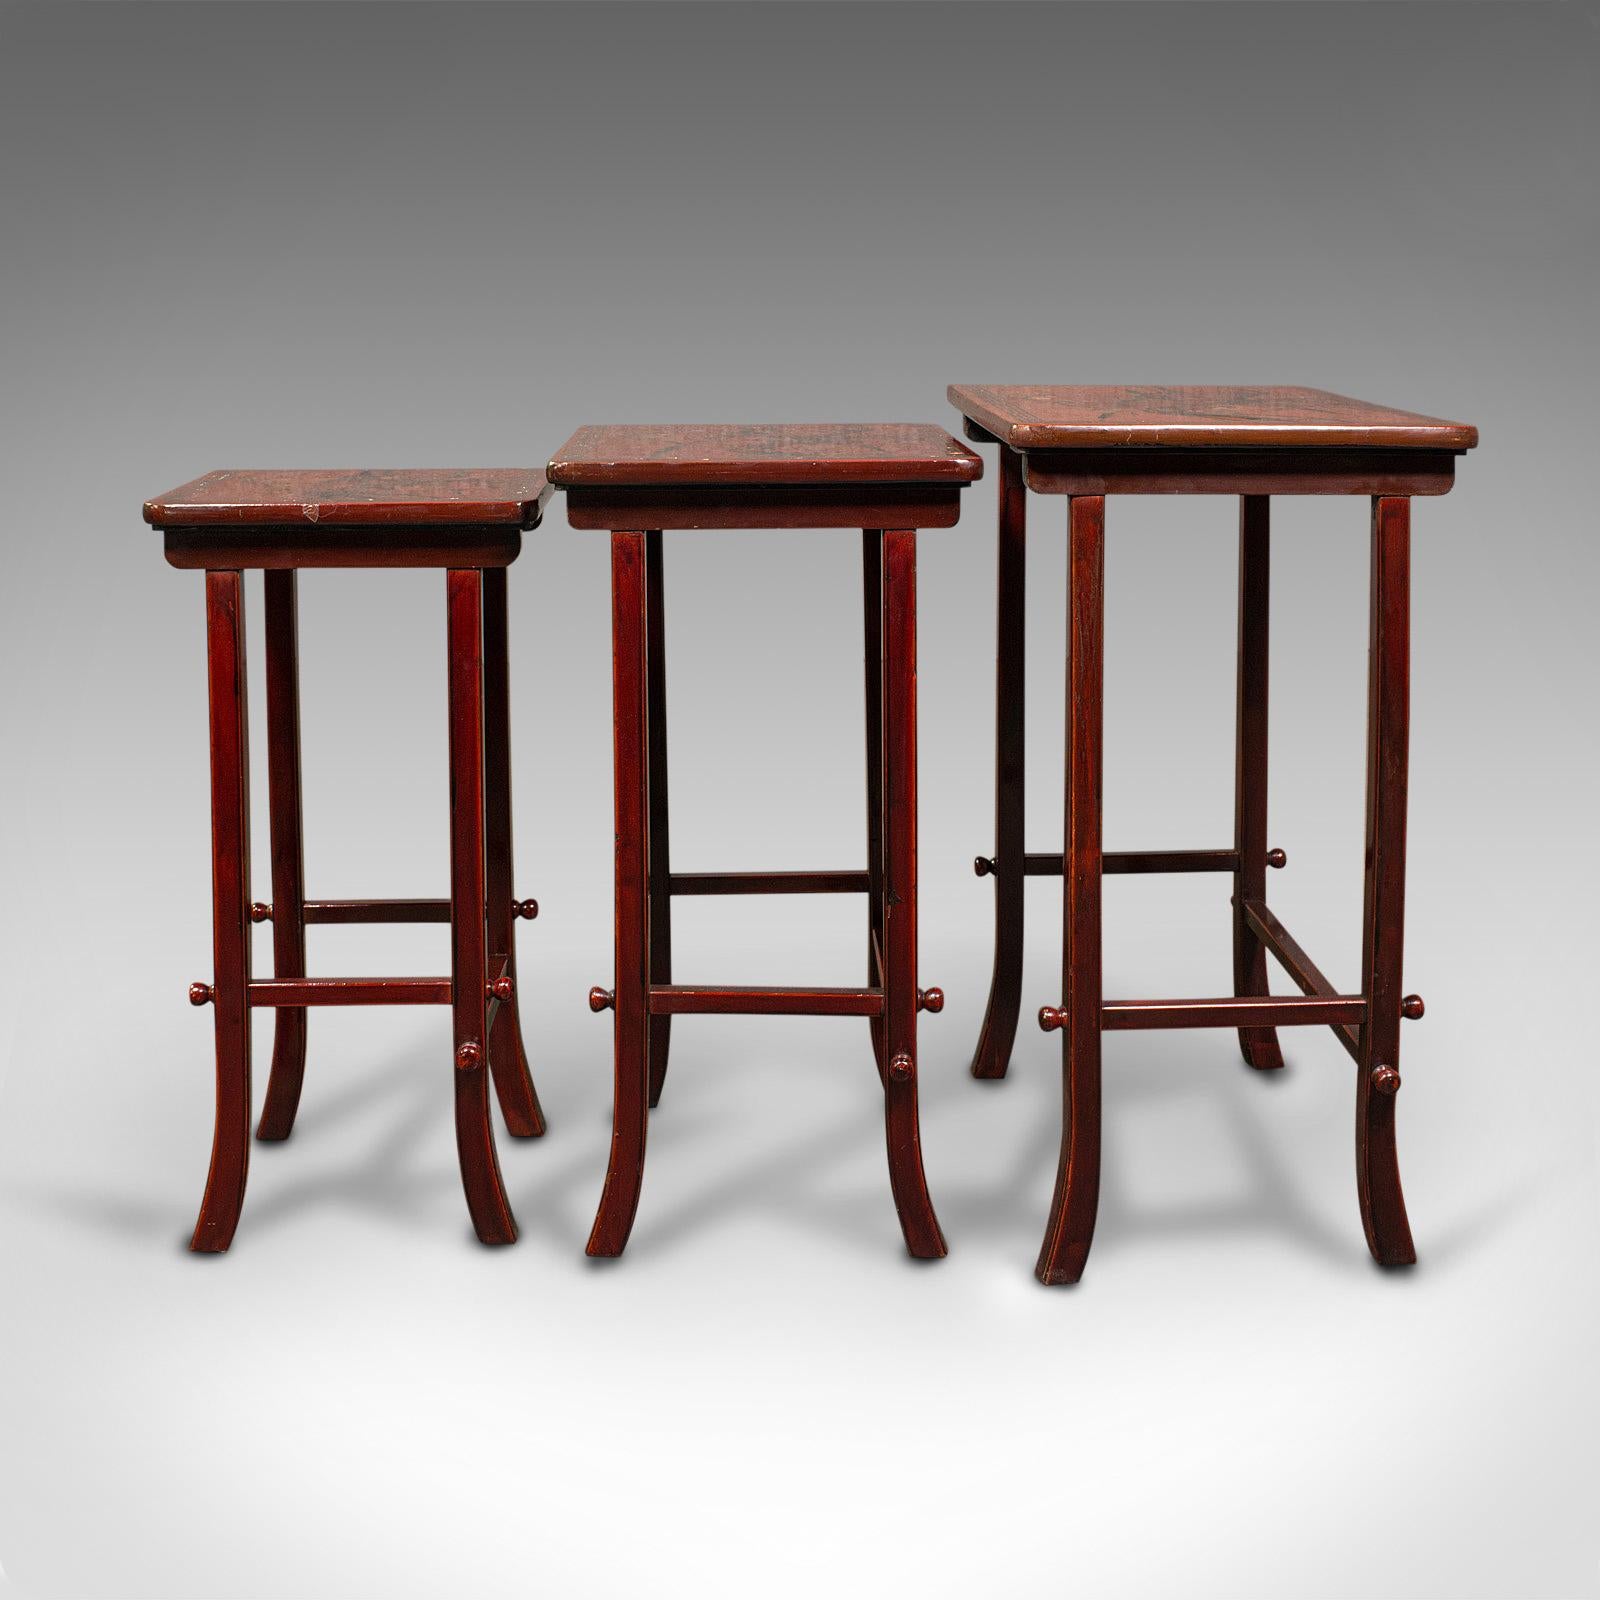 Antique Nest of 3 Occasional Side Tables, Oriental, Japanned, Victorian, C.1900 For Sale 2